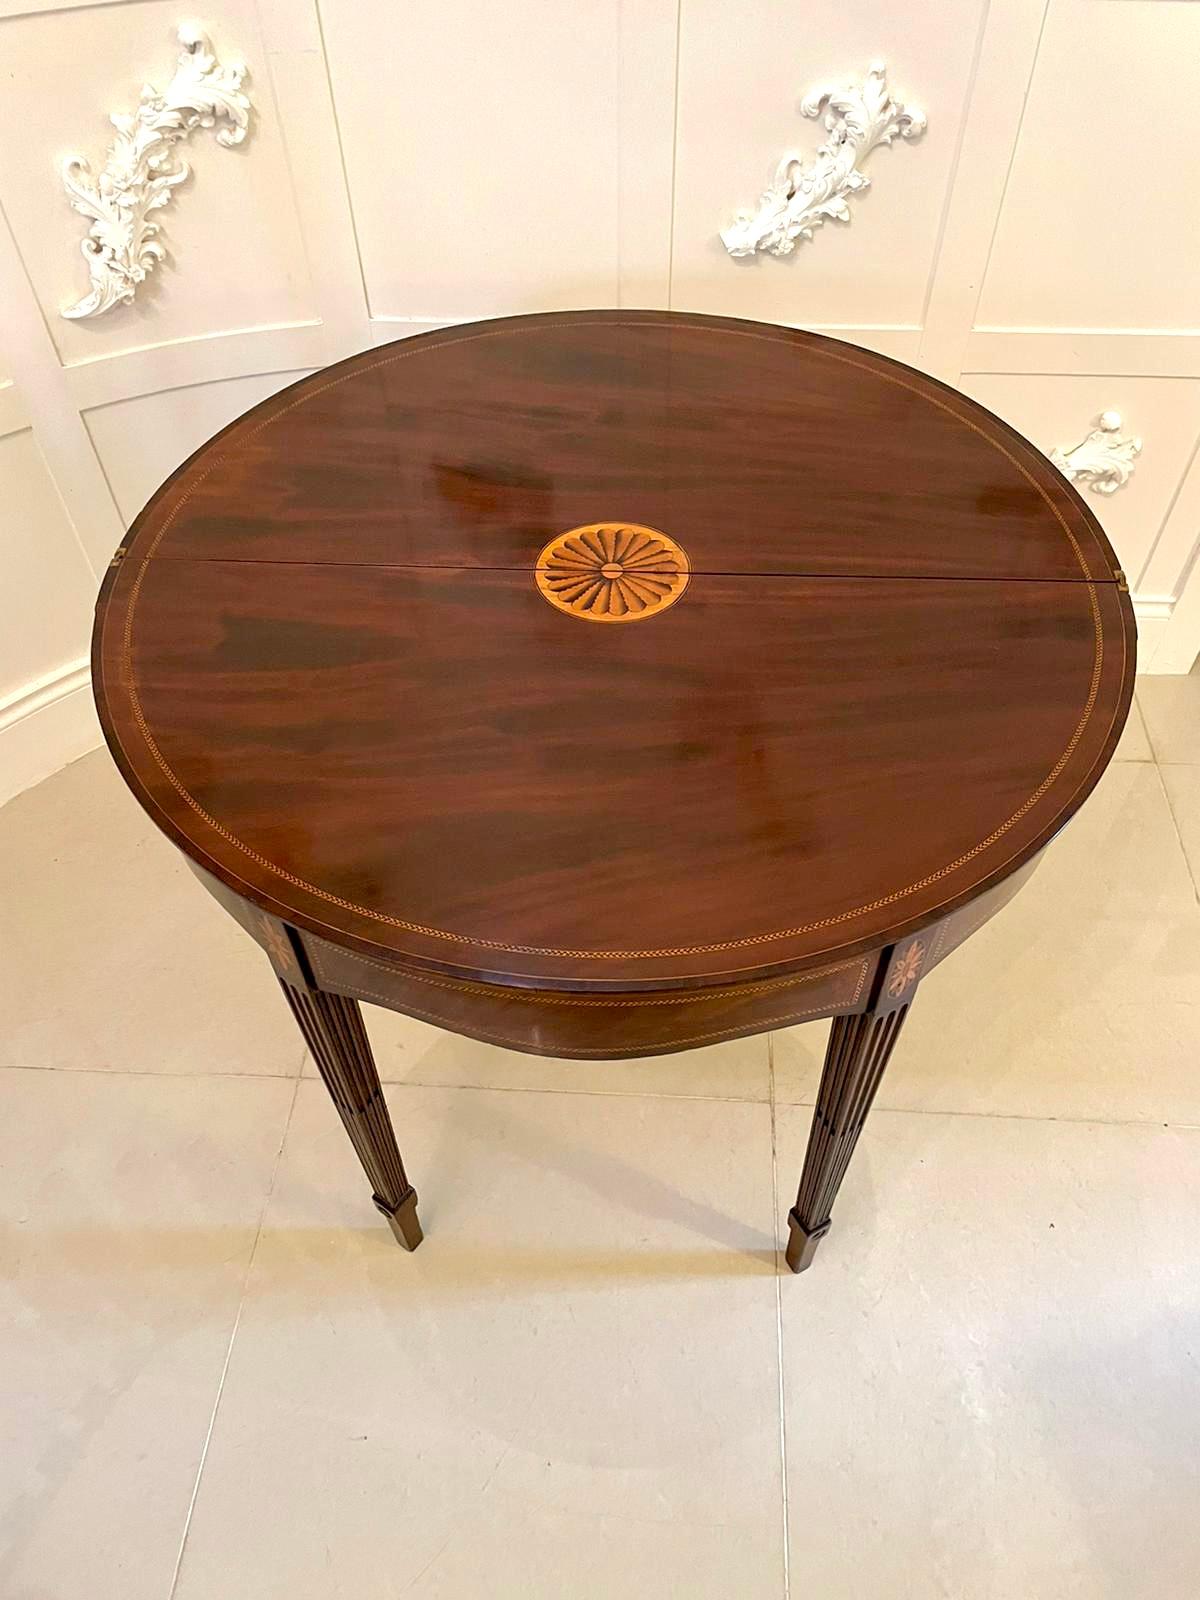 Outstanding Quality Antique Edwardian Inlaid Mahogany Demi-Lune Tea Table 3